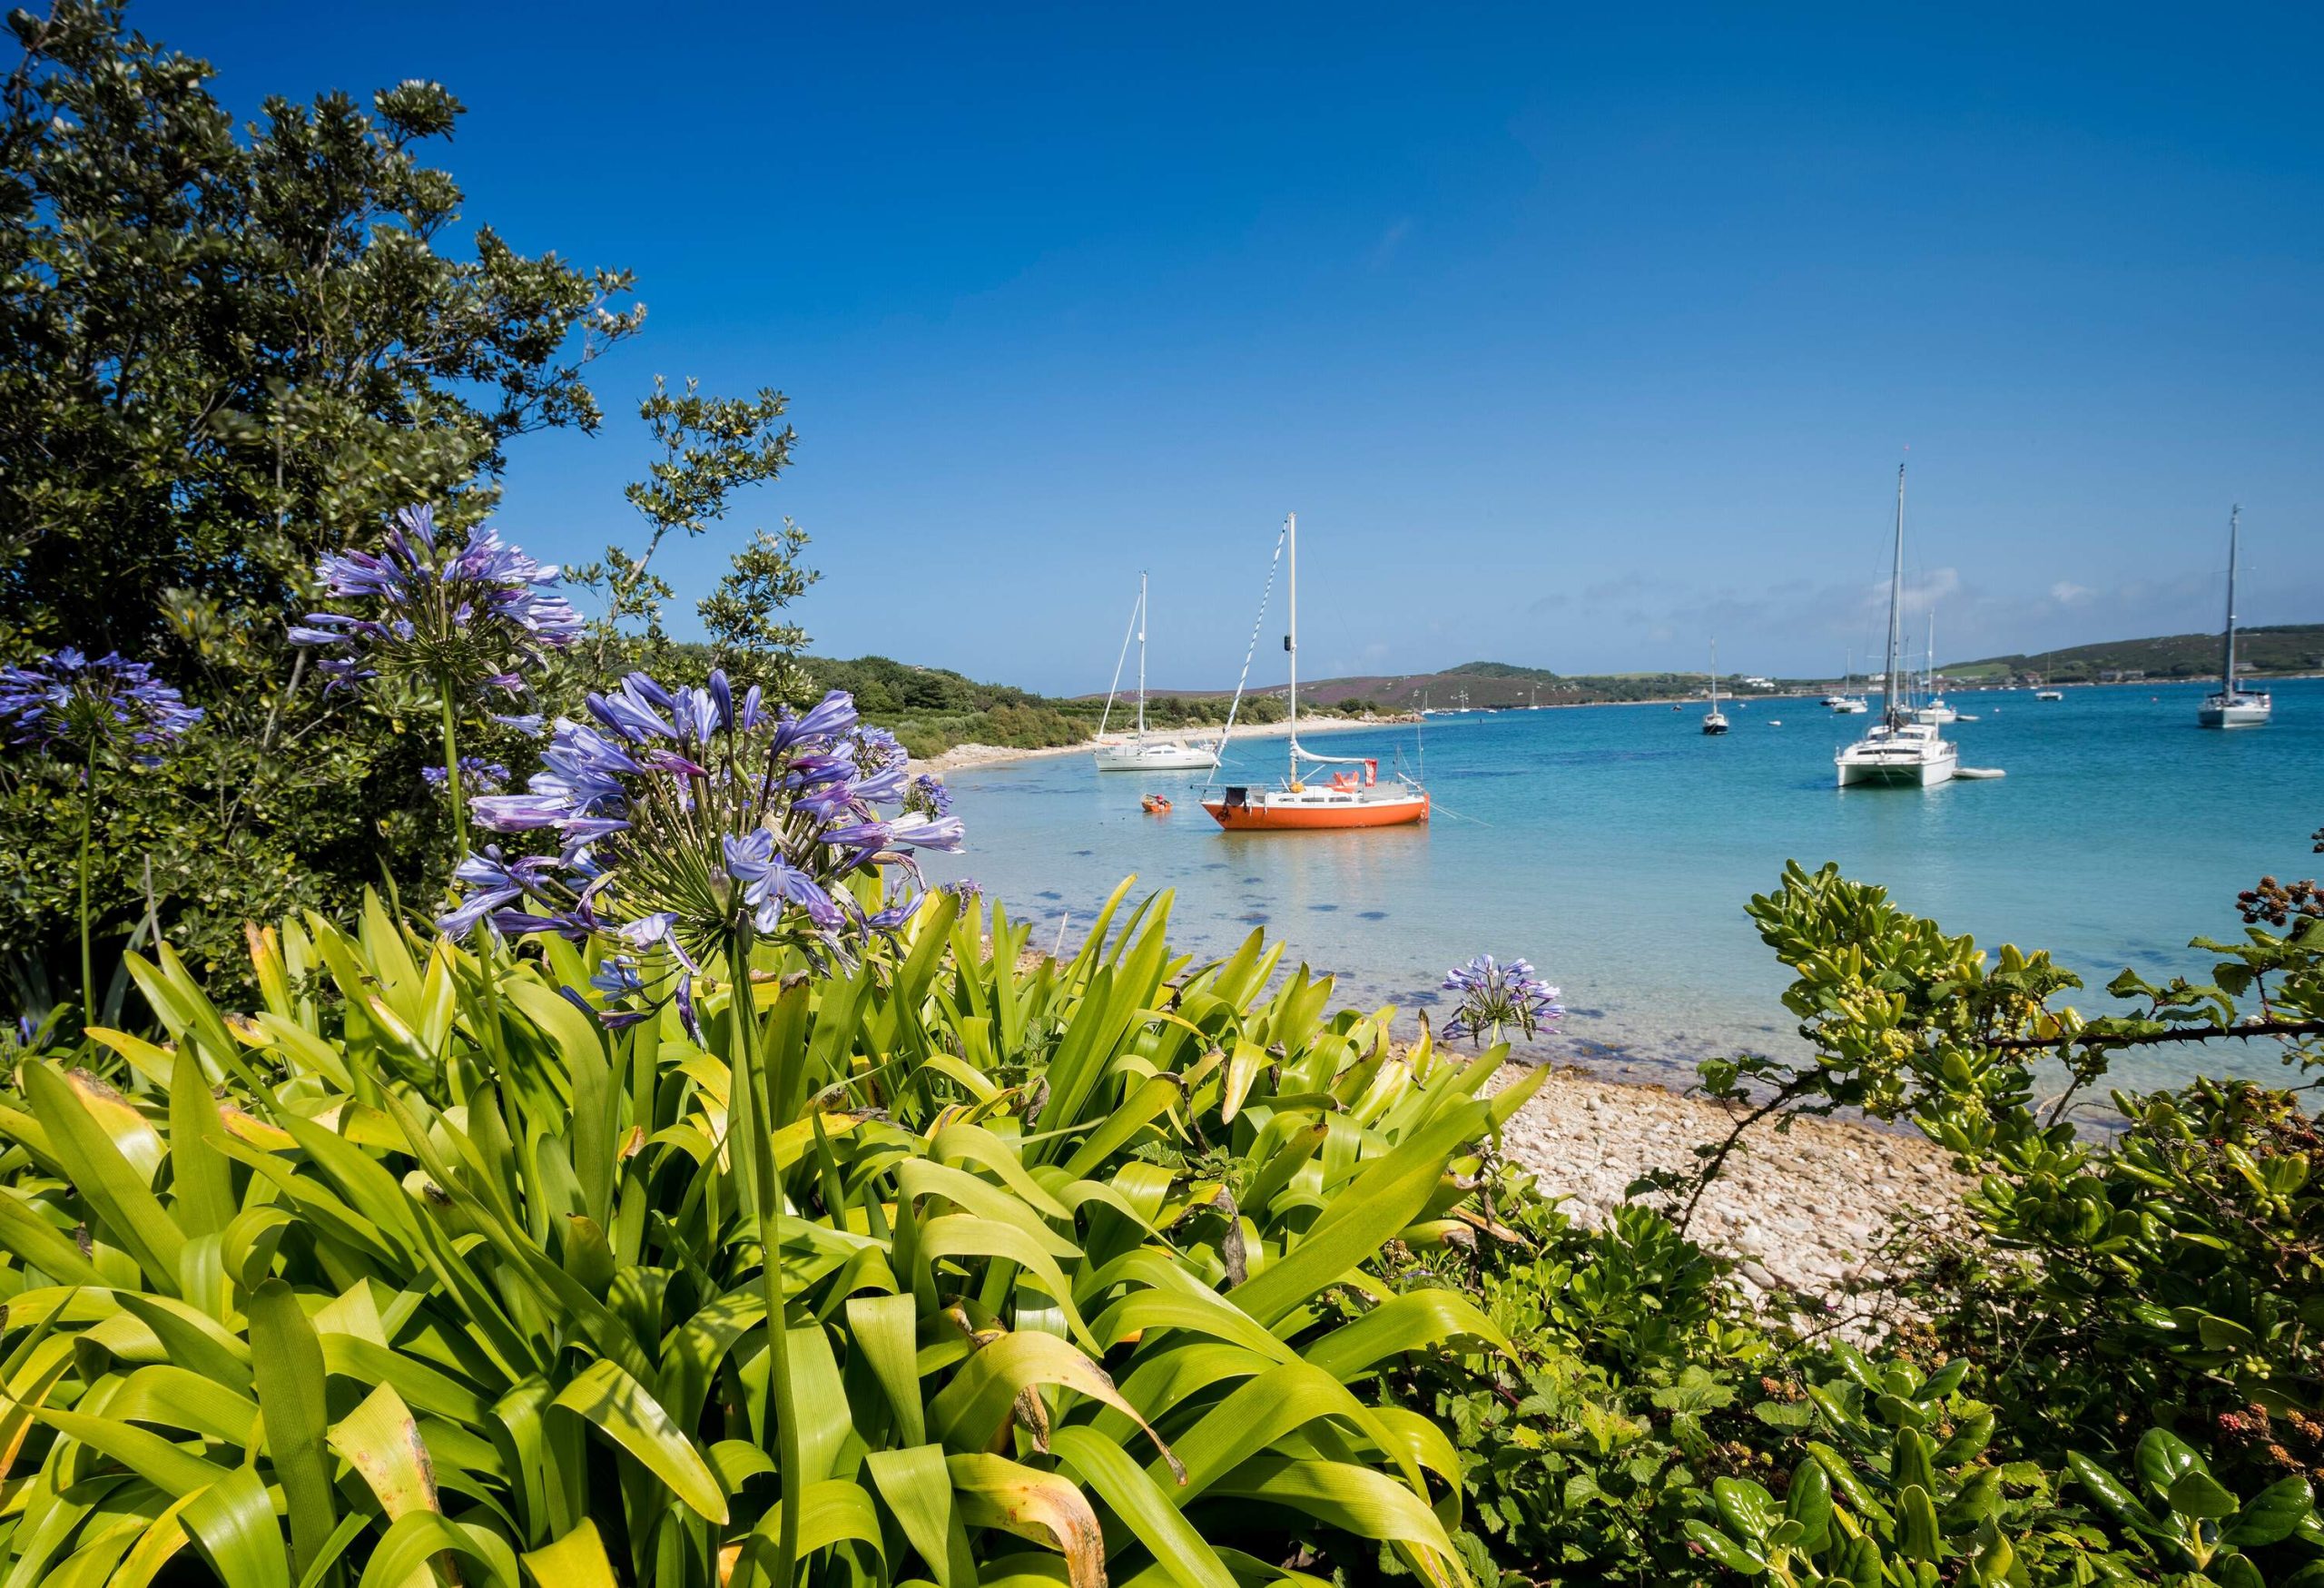 A fleet of sailboats anchored on a beach as seen from a coast with flowering plants.